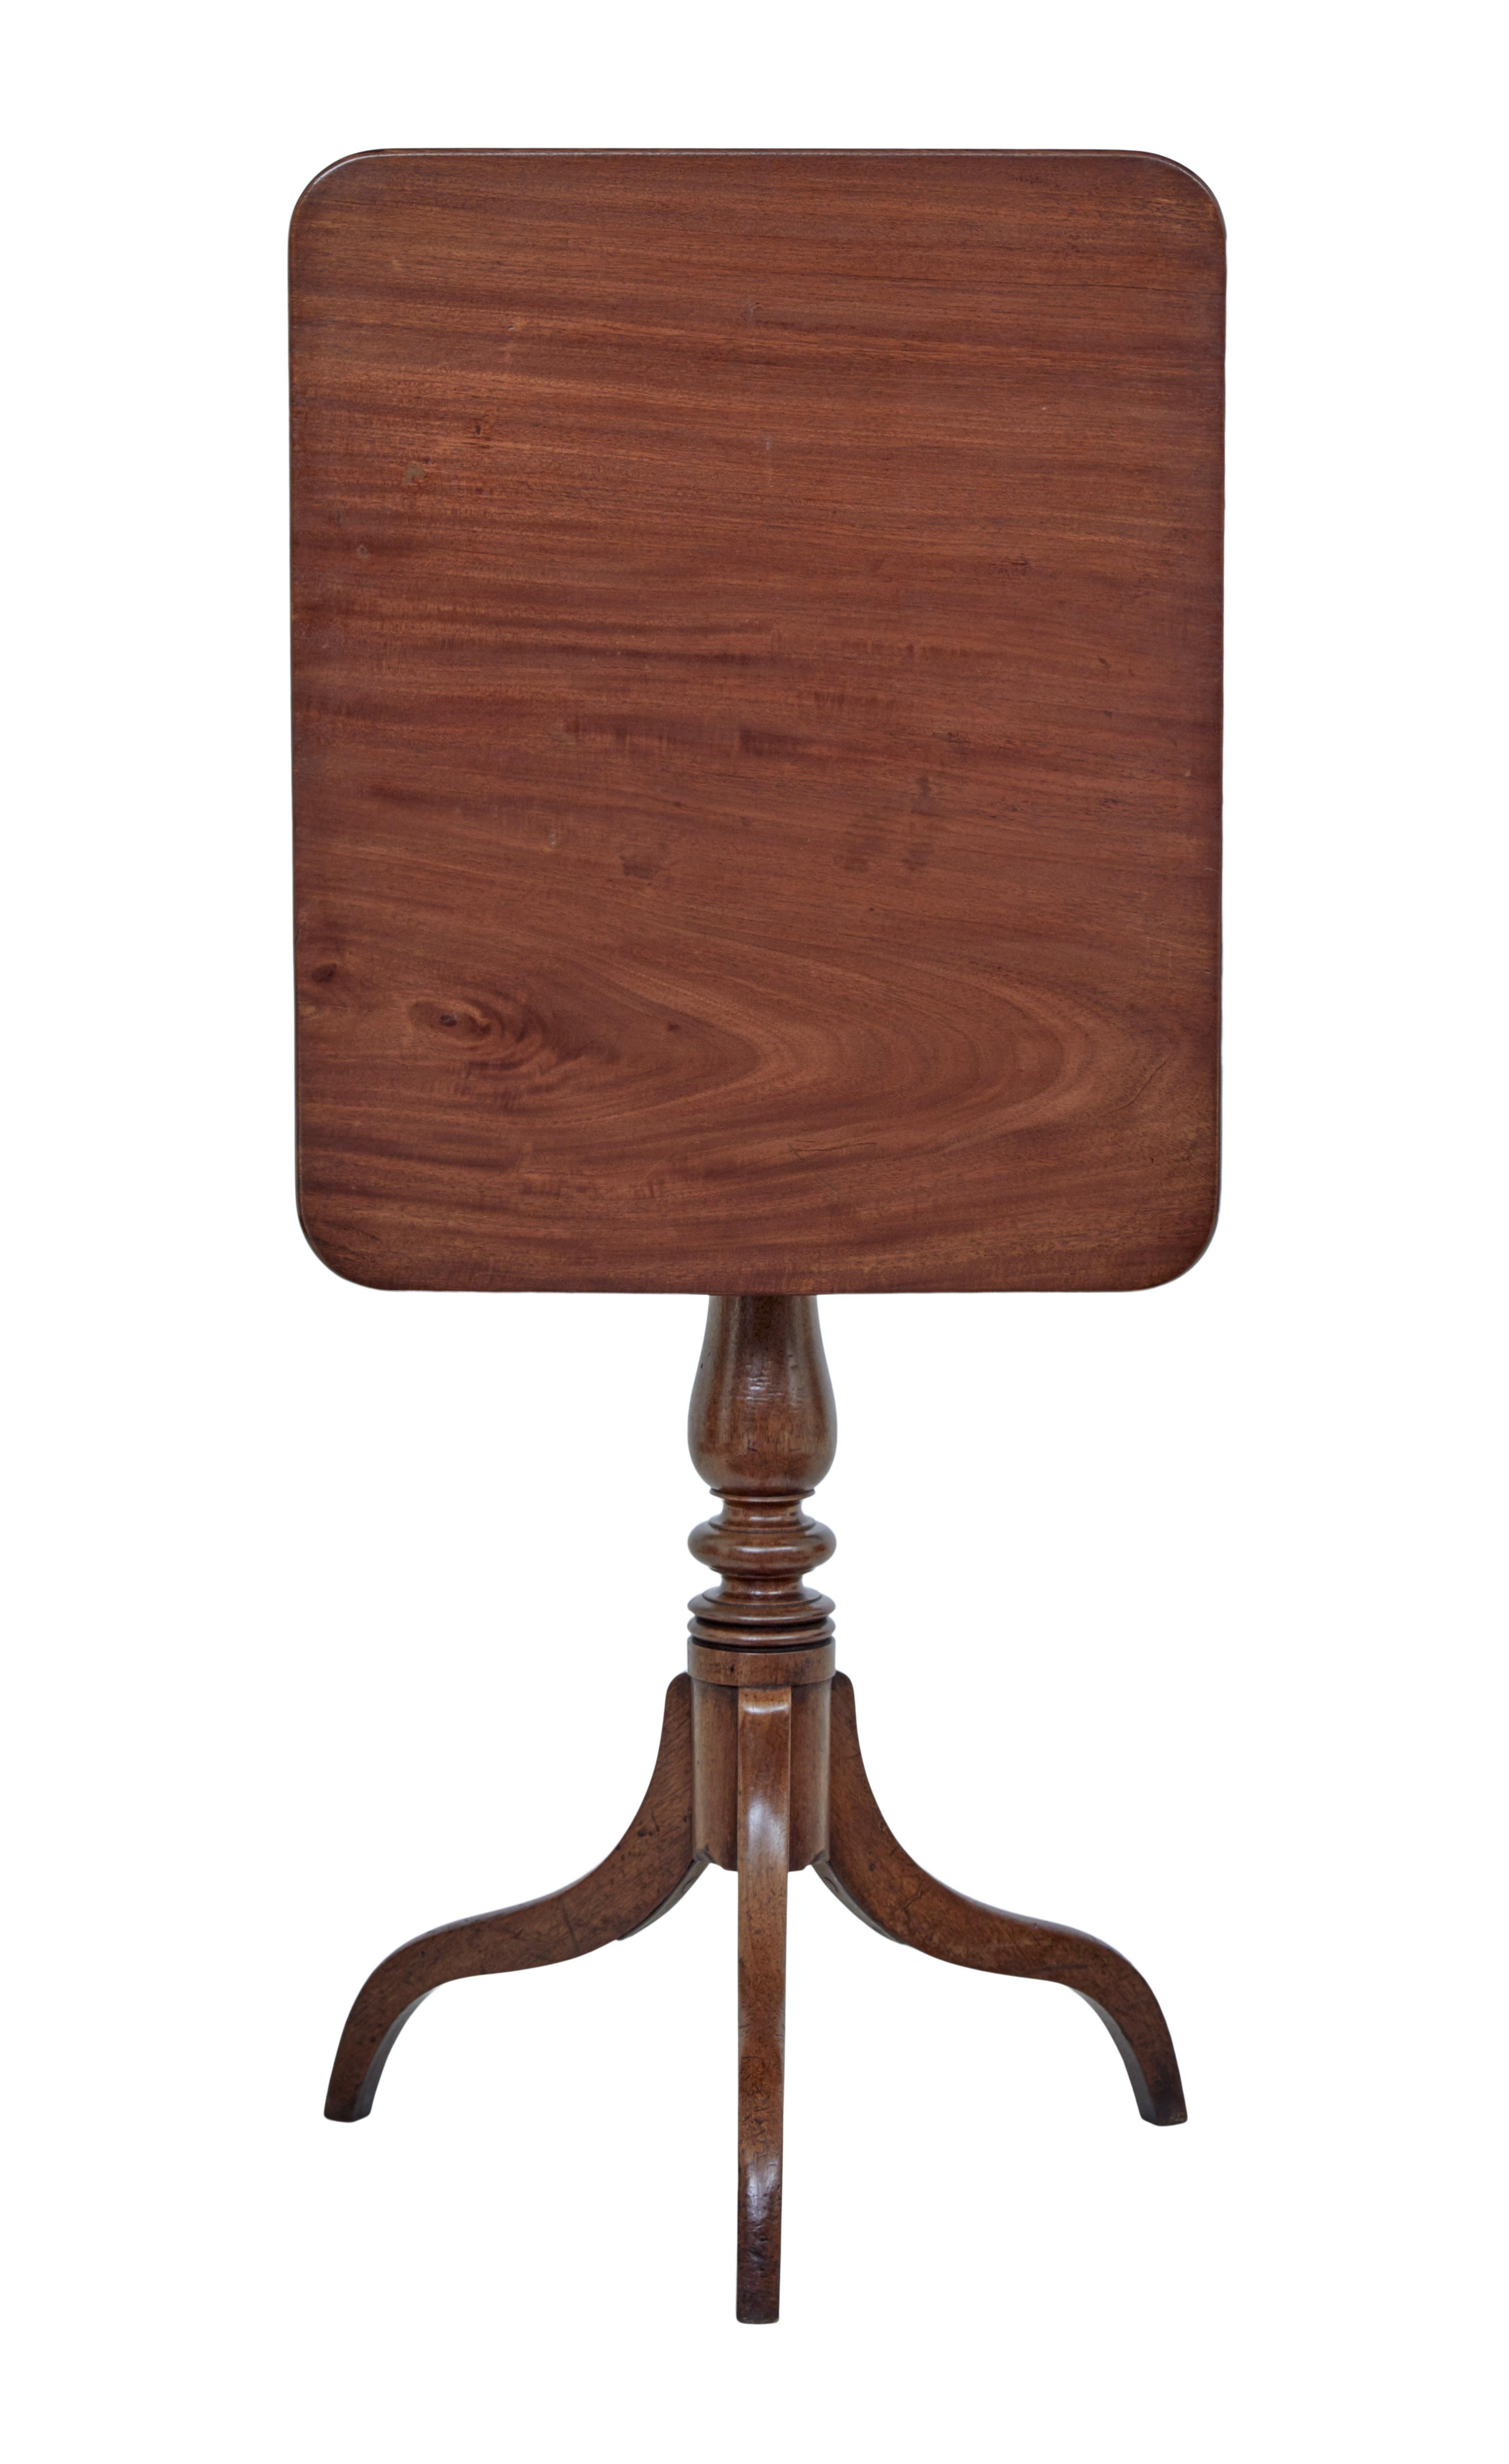 Early 19th century tilt-top occasional table, circa 1810.

Rectangular top with rounded corners. Standing on a turned stem and supported by 3 scrolling legs. Tilting mechanism allows easier storage.

Ideal for use as a lamp or side